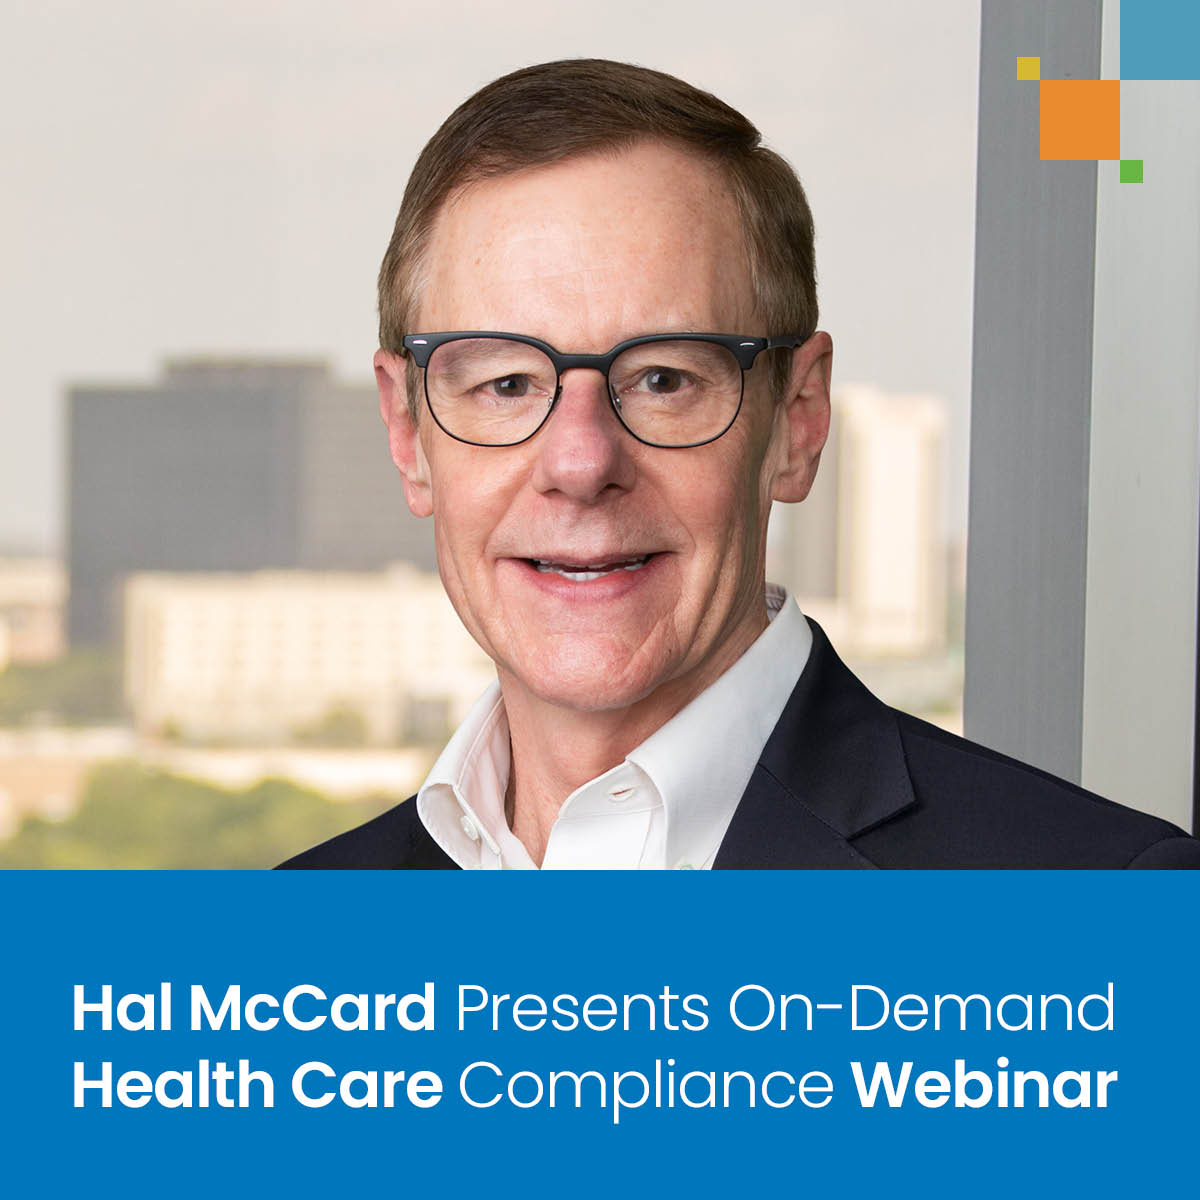 Join Hal McCard for an Exclusive Webinar on Health Care Compliance